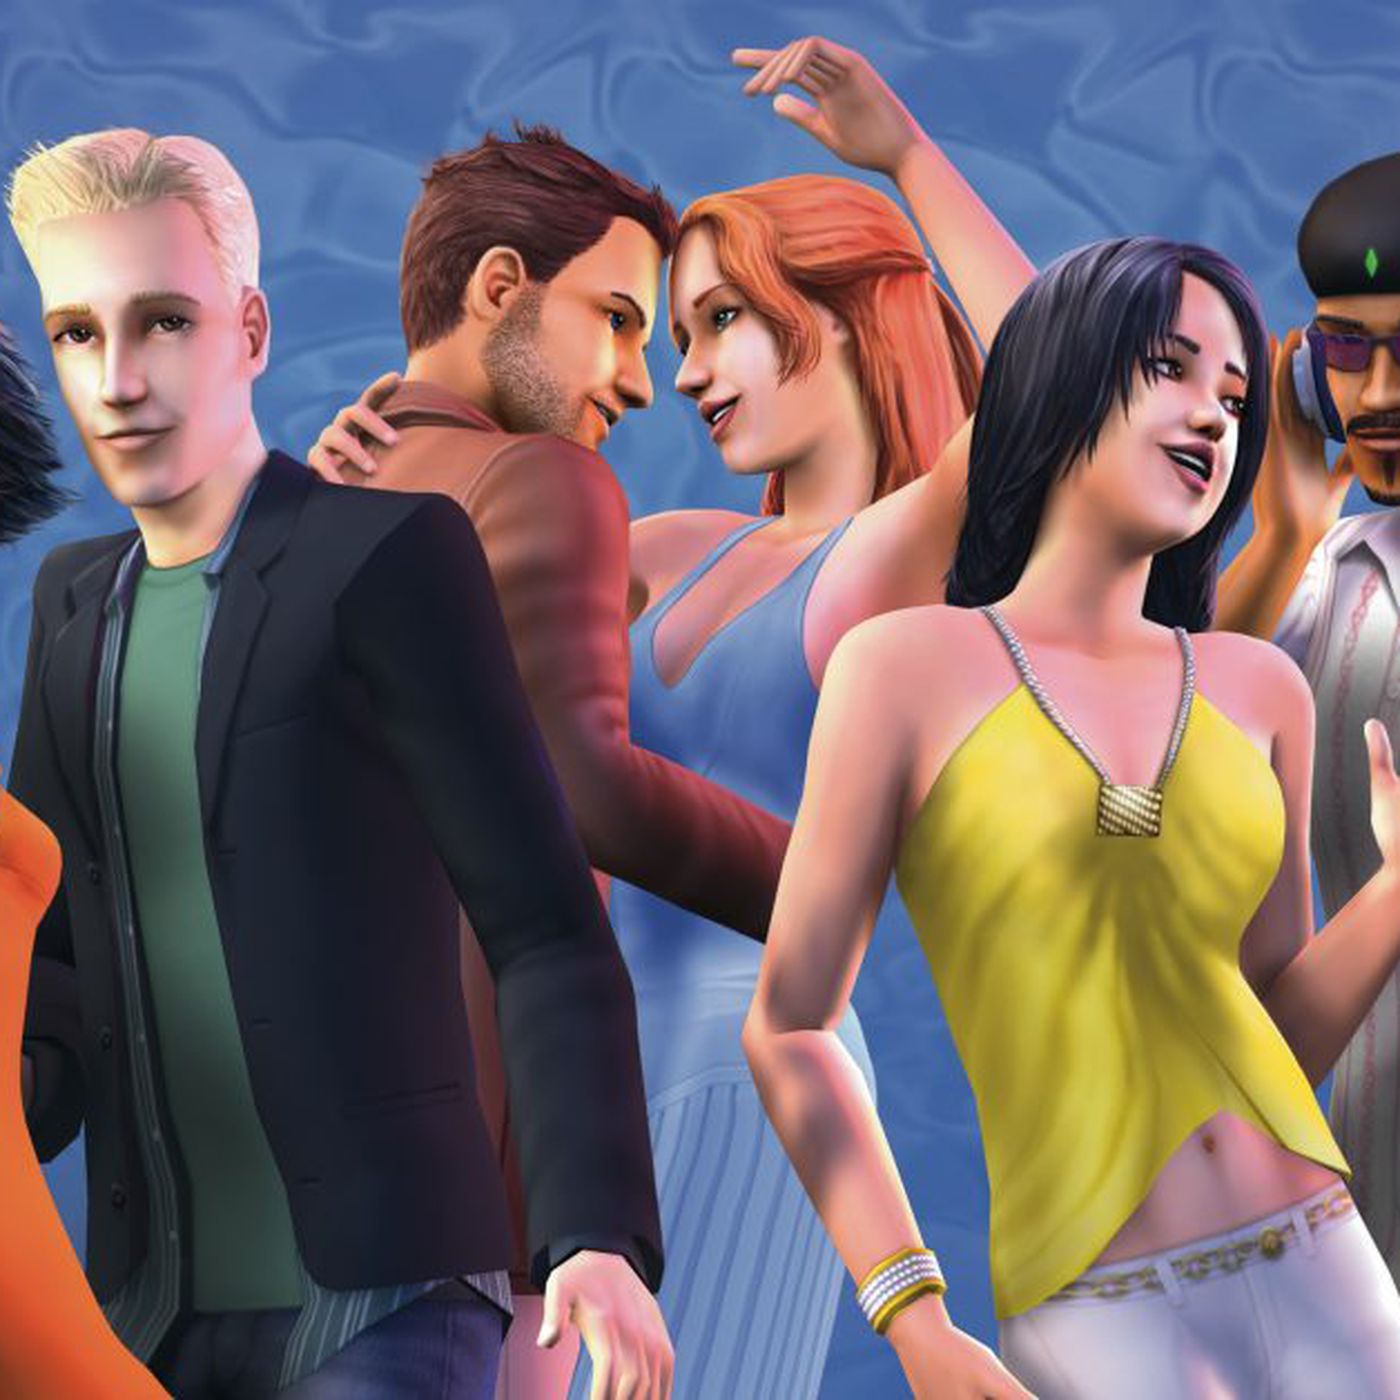 The Sims 2 PS4 Version Full Game Free Download